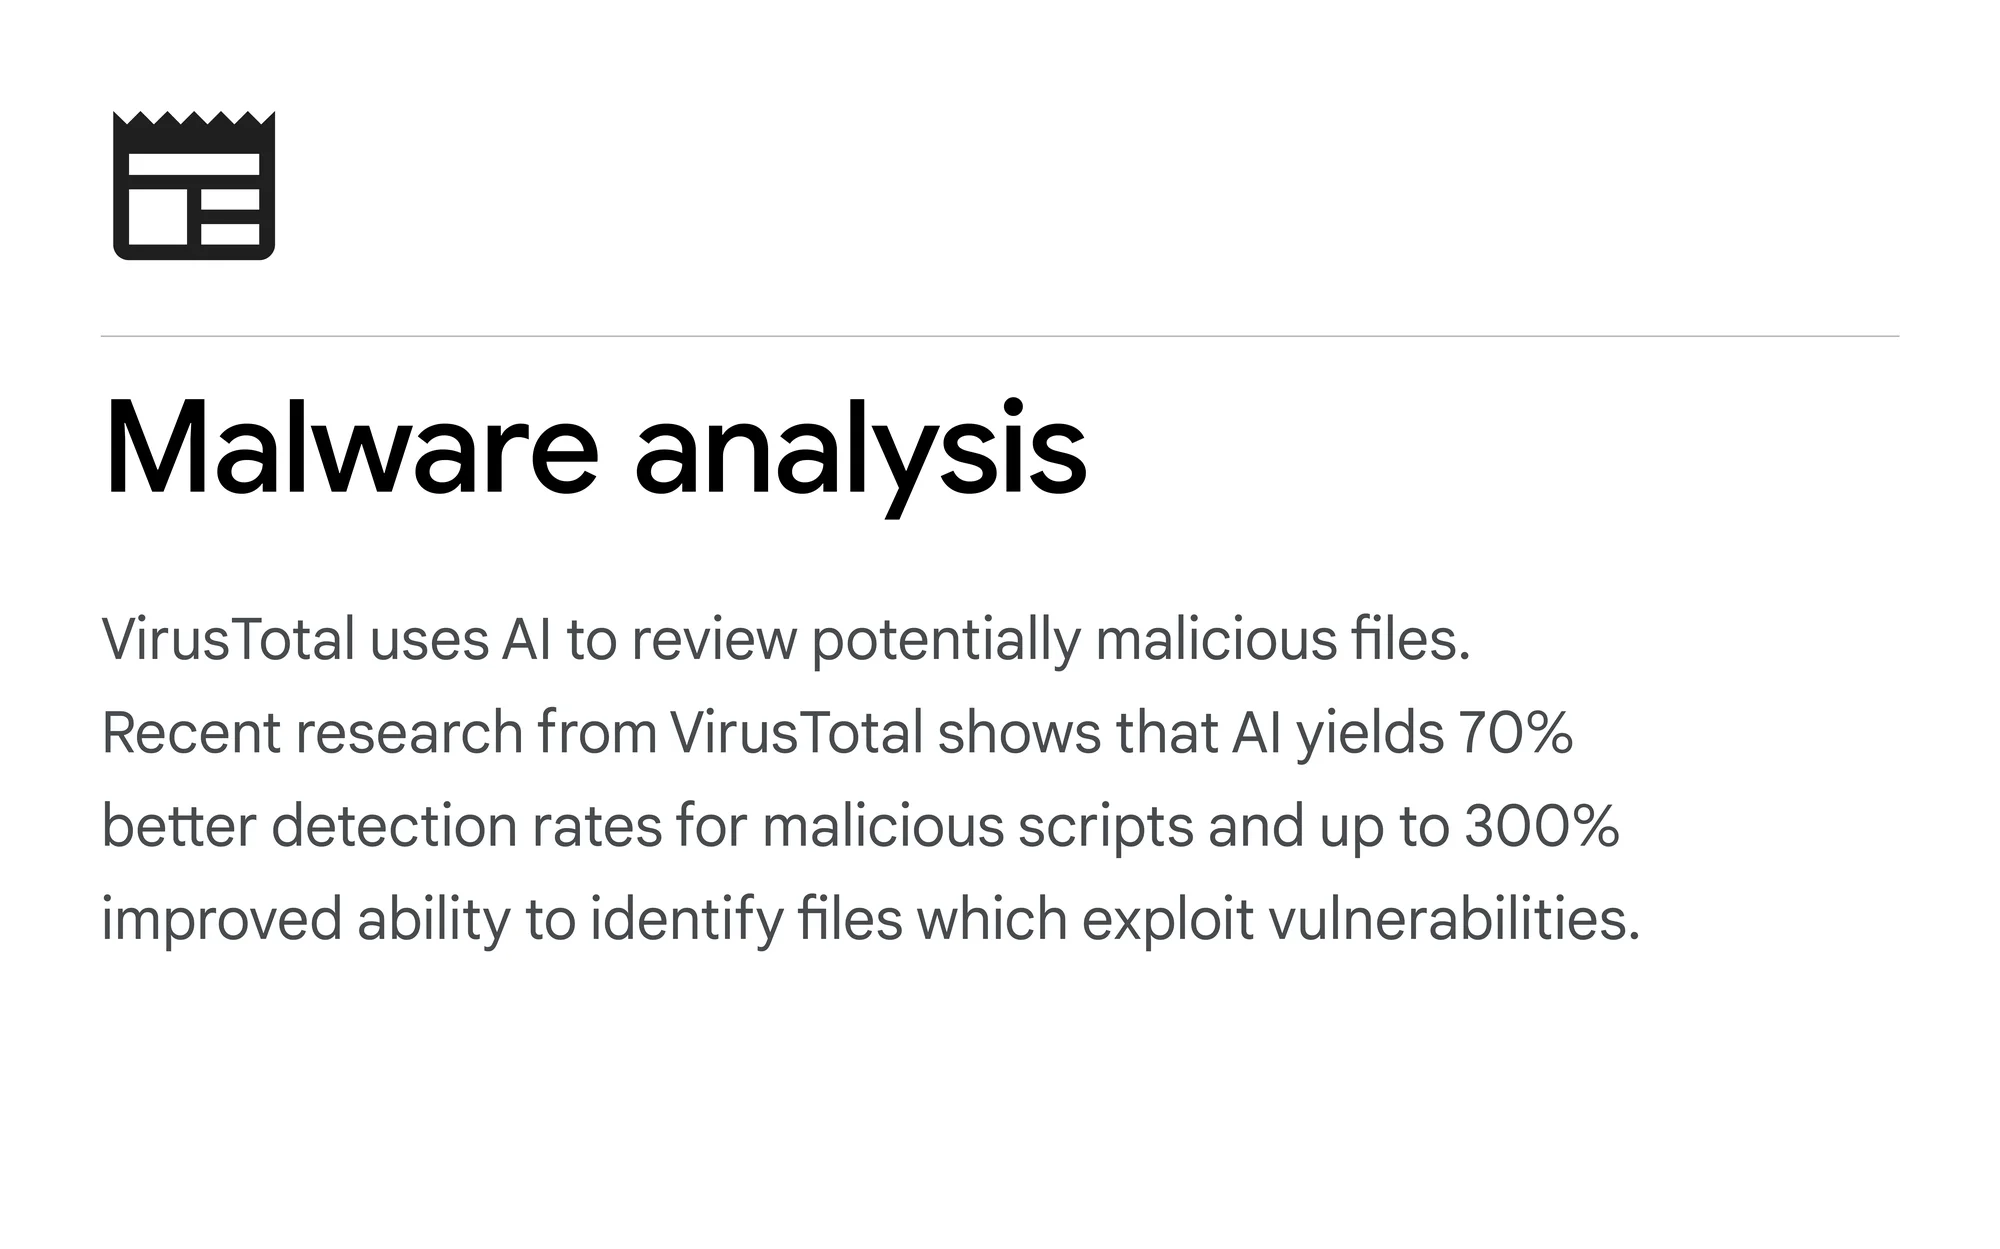 a text card that reads: Malware analysis: VirusTotal uses AI to review potentially malicious files. Recent research from VirusTotal shows that AI yields 70% better detection rates for malicious scripts and up to 300% improved ability to identify files which exploit vulnerabilities.